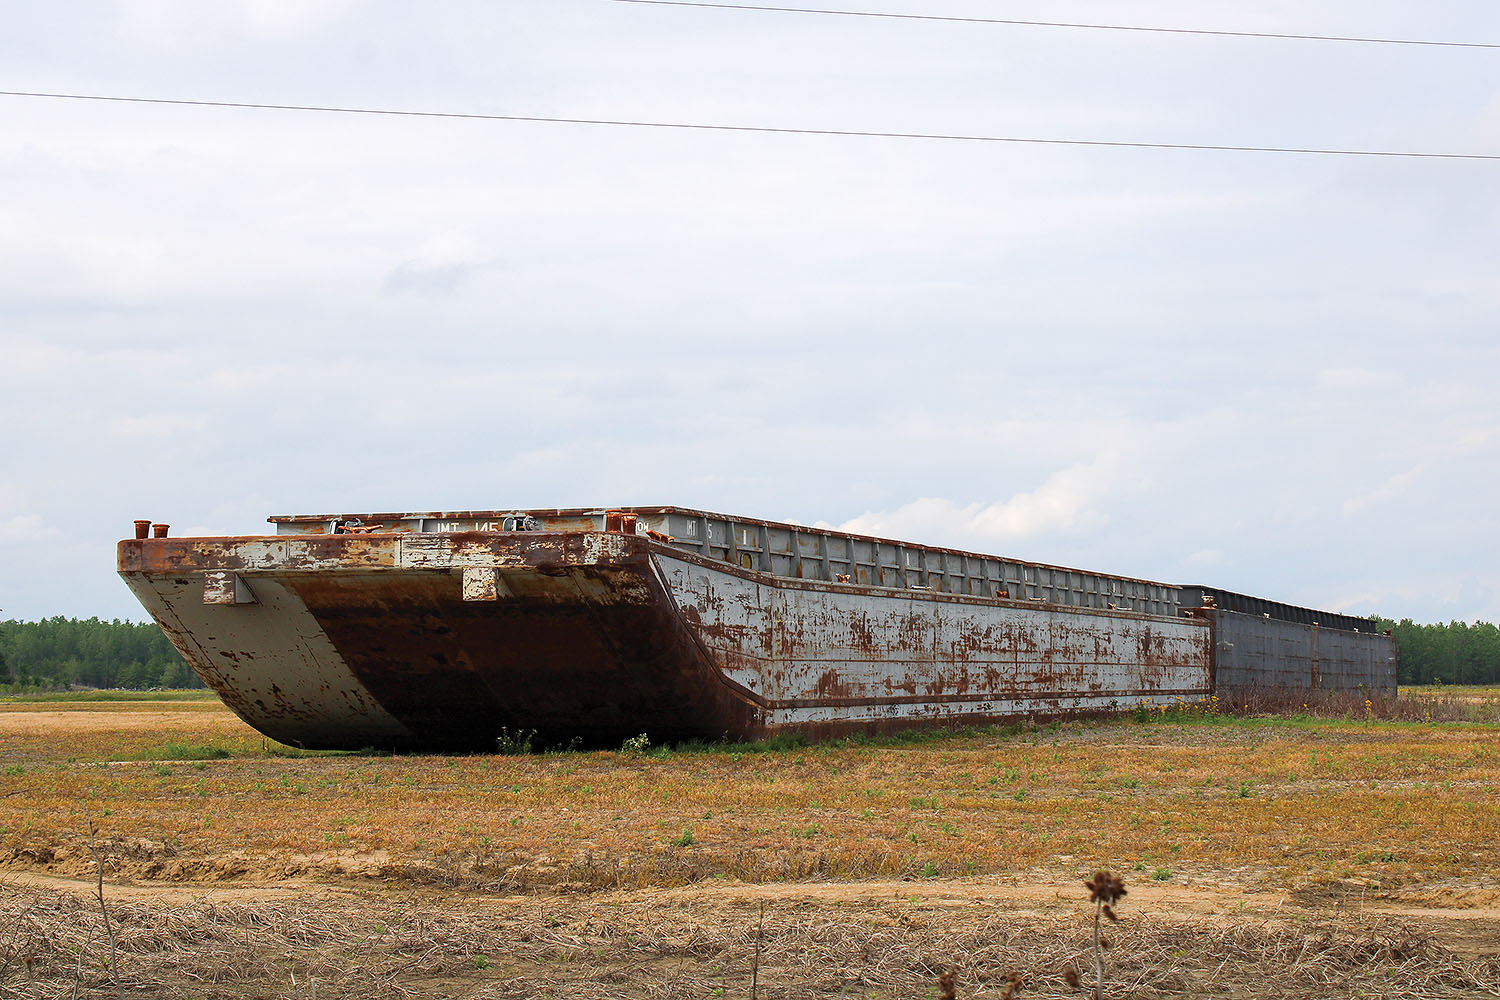 Barges_Stranded_In_Field